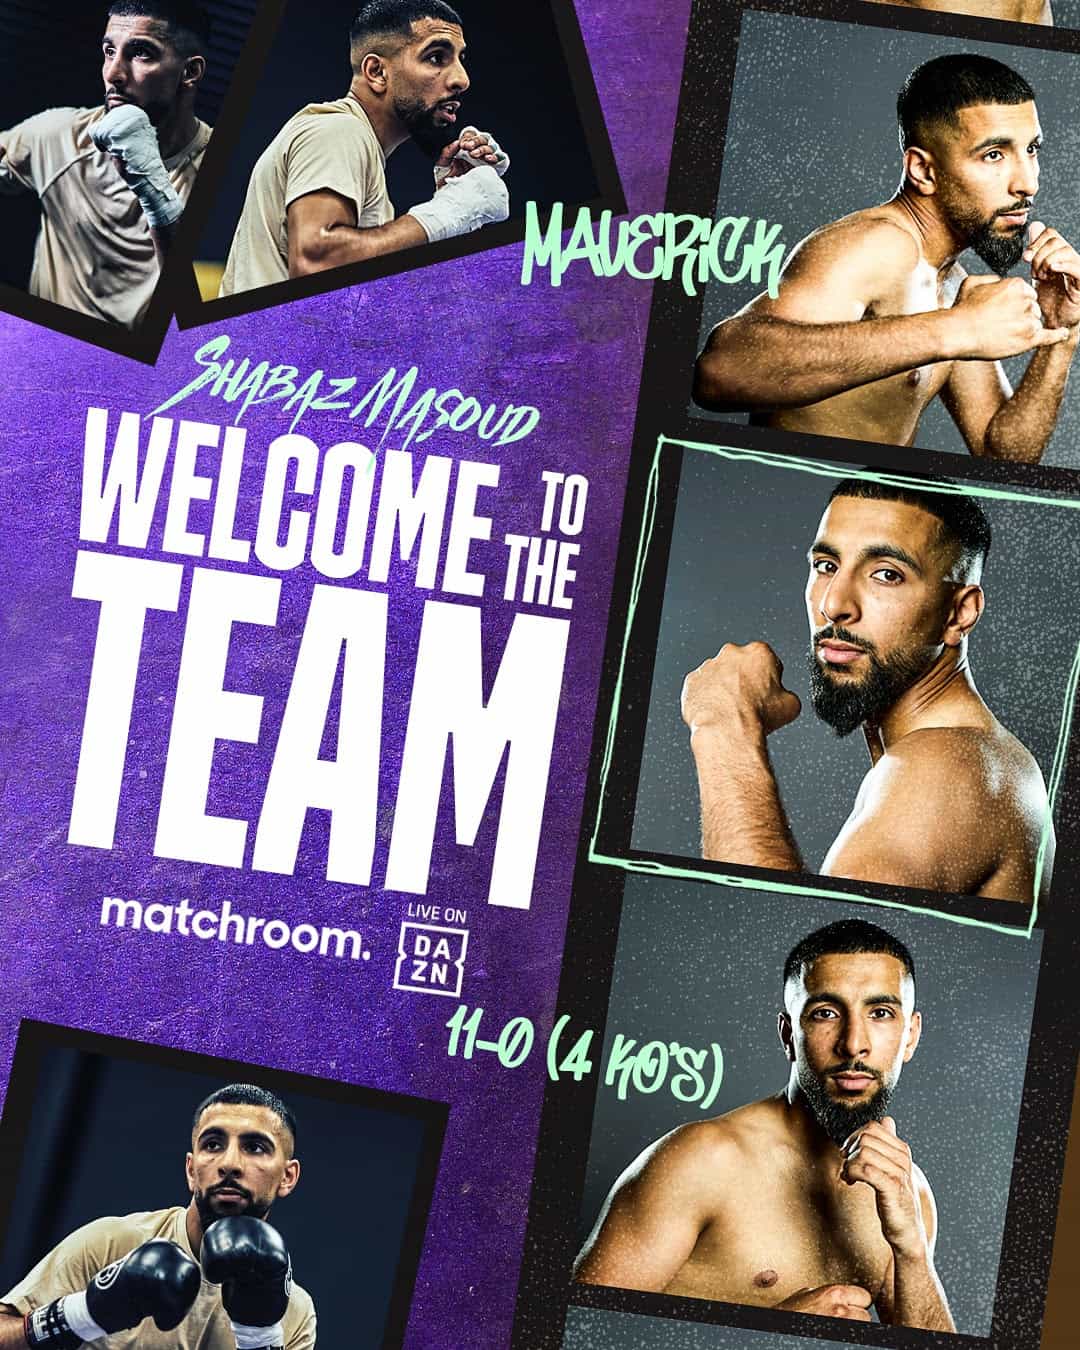 SHABAZ MASOUD INKS PROMOTIONAL PACT WITH MATCHROOM BOXING